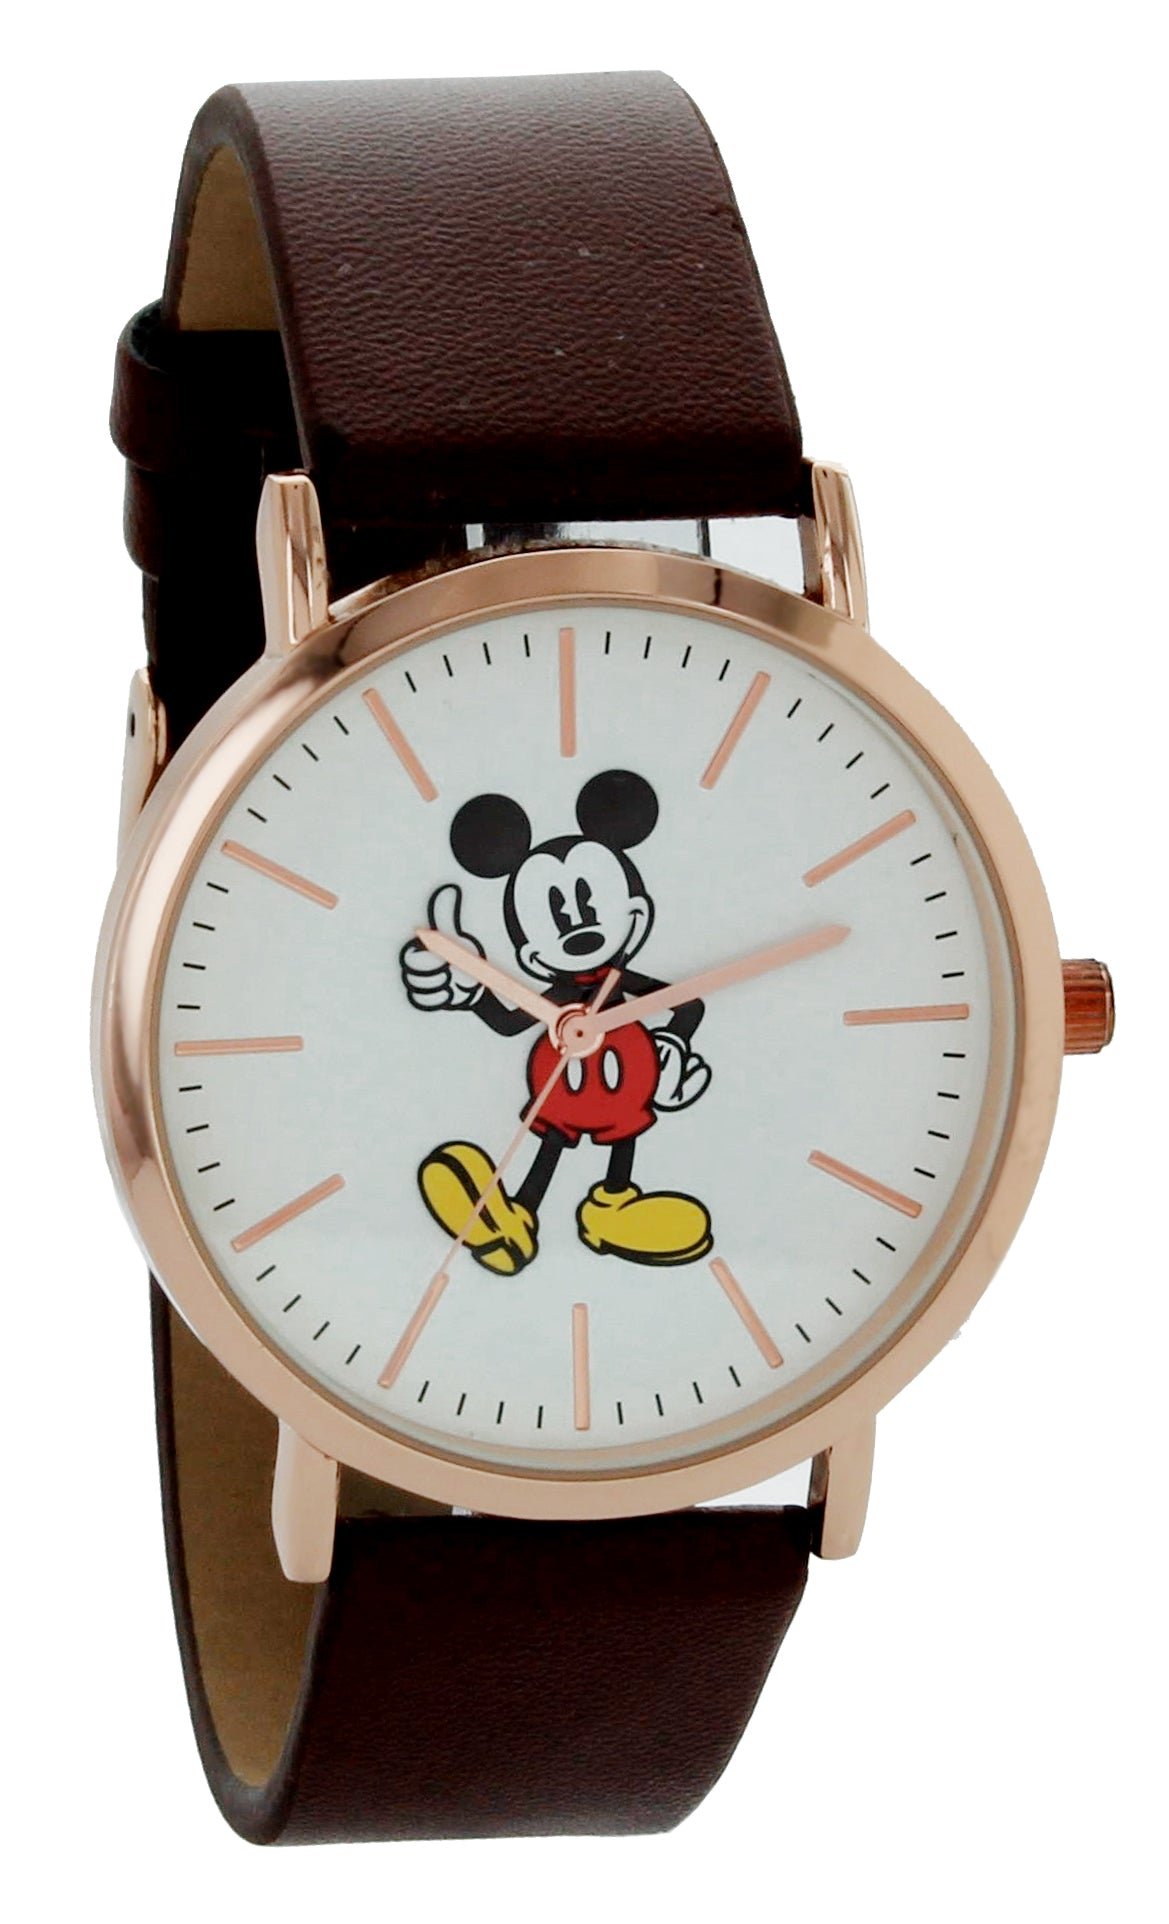 Model: Disney Mickey Mouse Watch Rose Gold Tone Case and Brown Strap